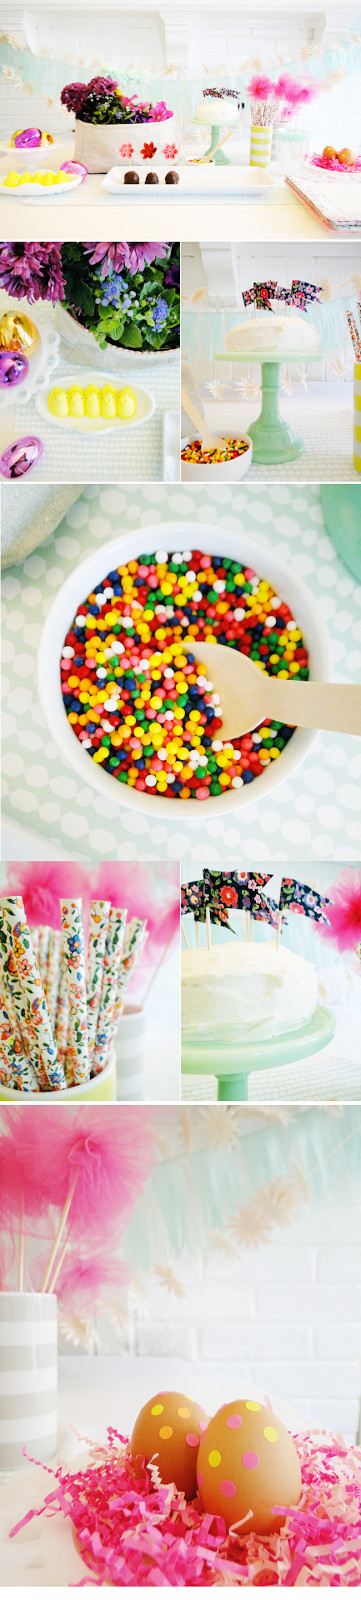 Easter Party Ideas Pinterest
 The Pink Doormat Easter Party Ideas on Pinterest